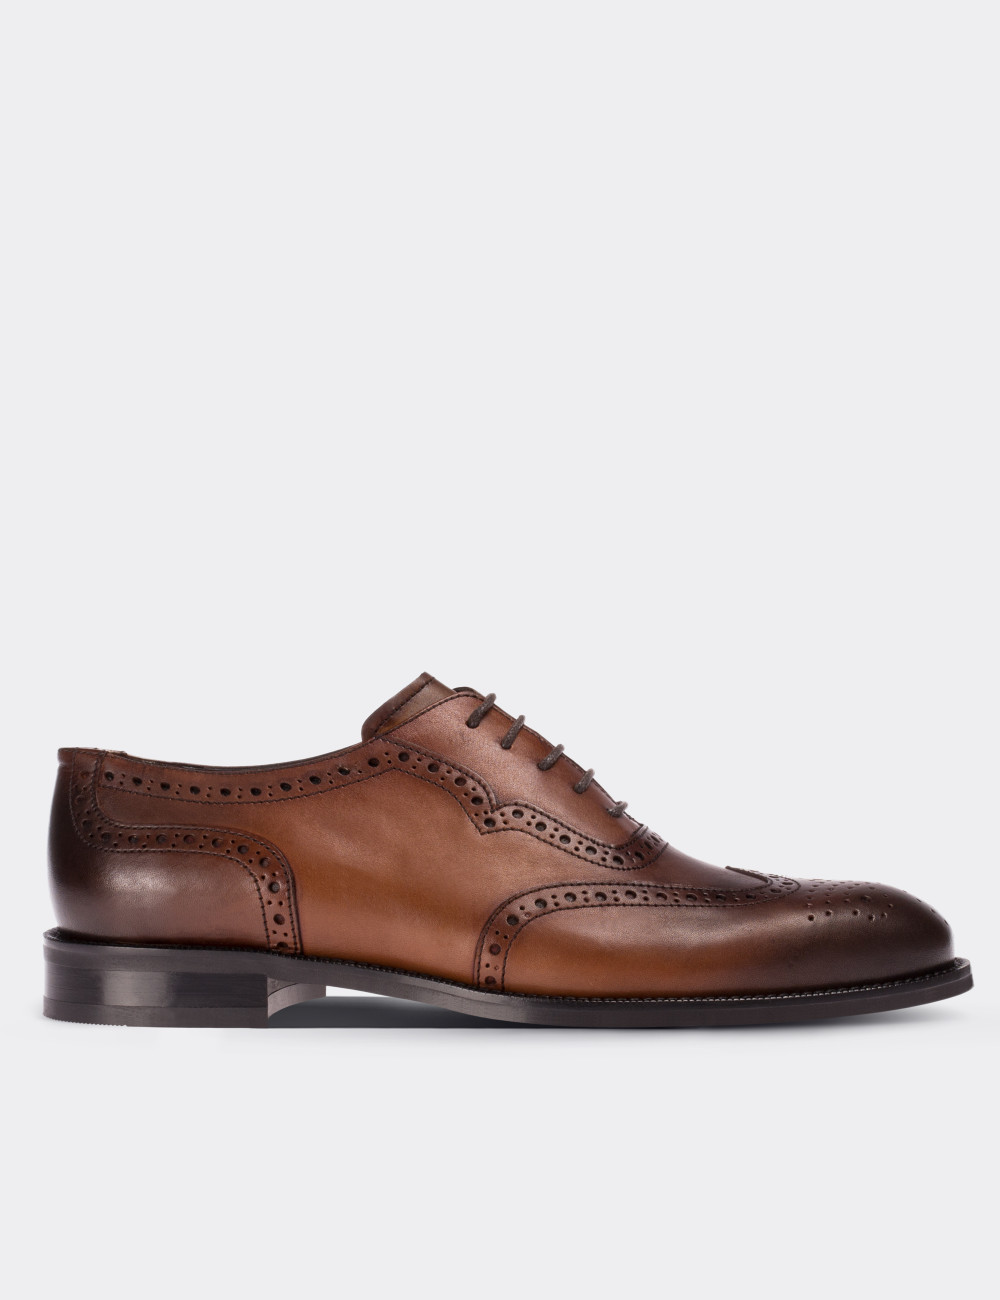 Tan Leather Classic Shoes - Deery